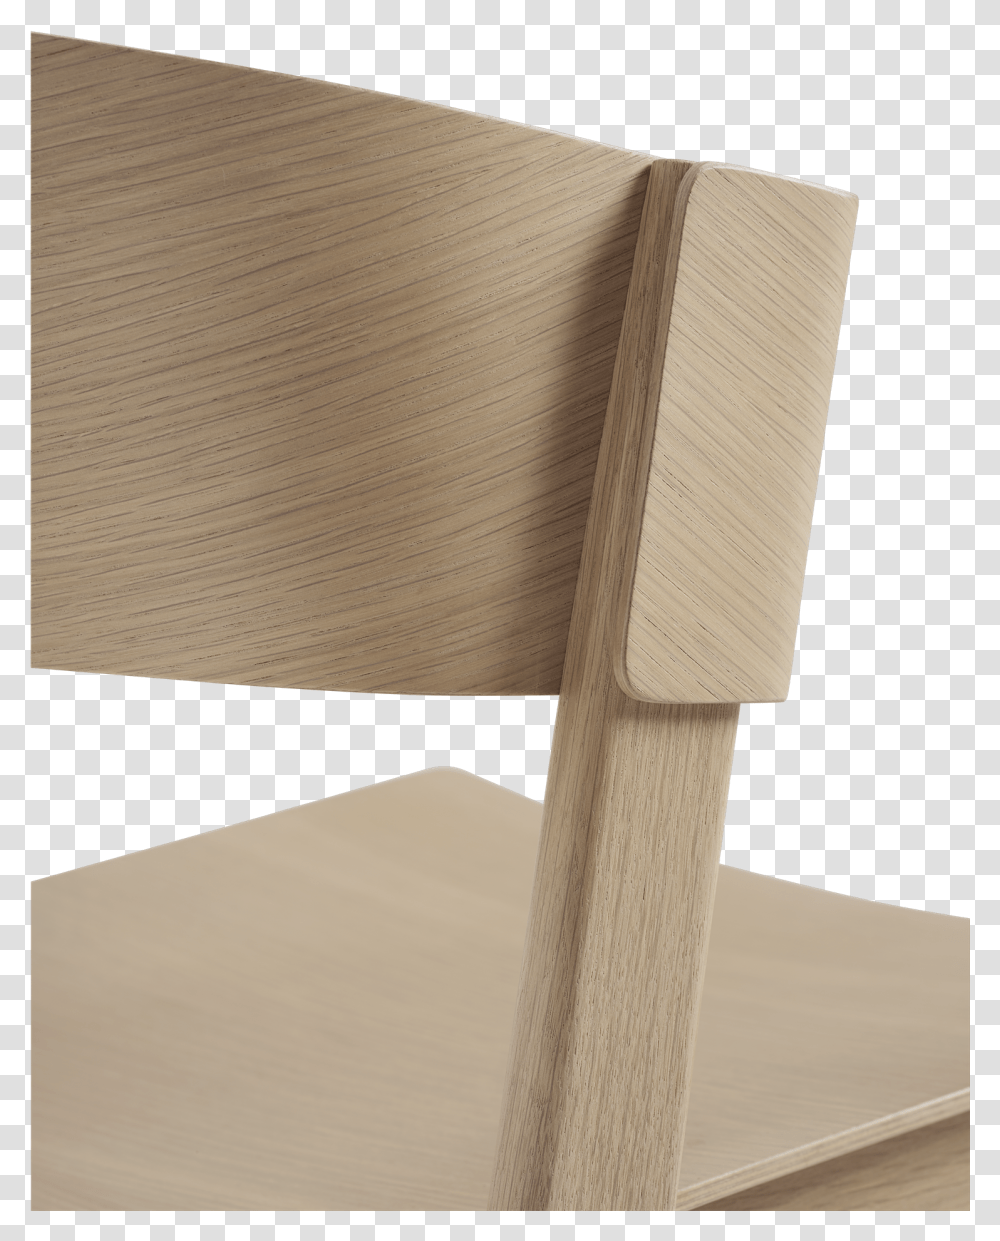 Crafted With Precision, Wood, Plywood, Tabletop, Furniture Transparent Png